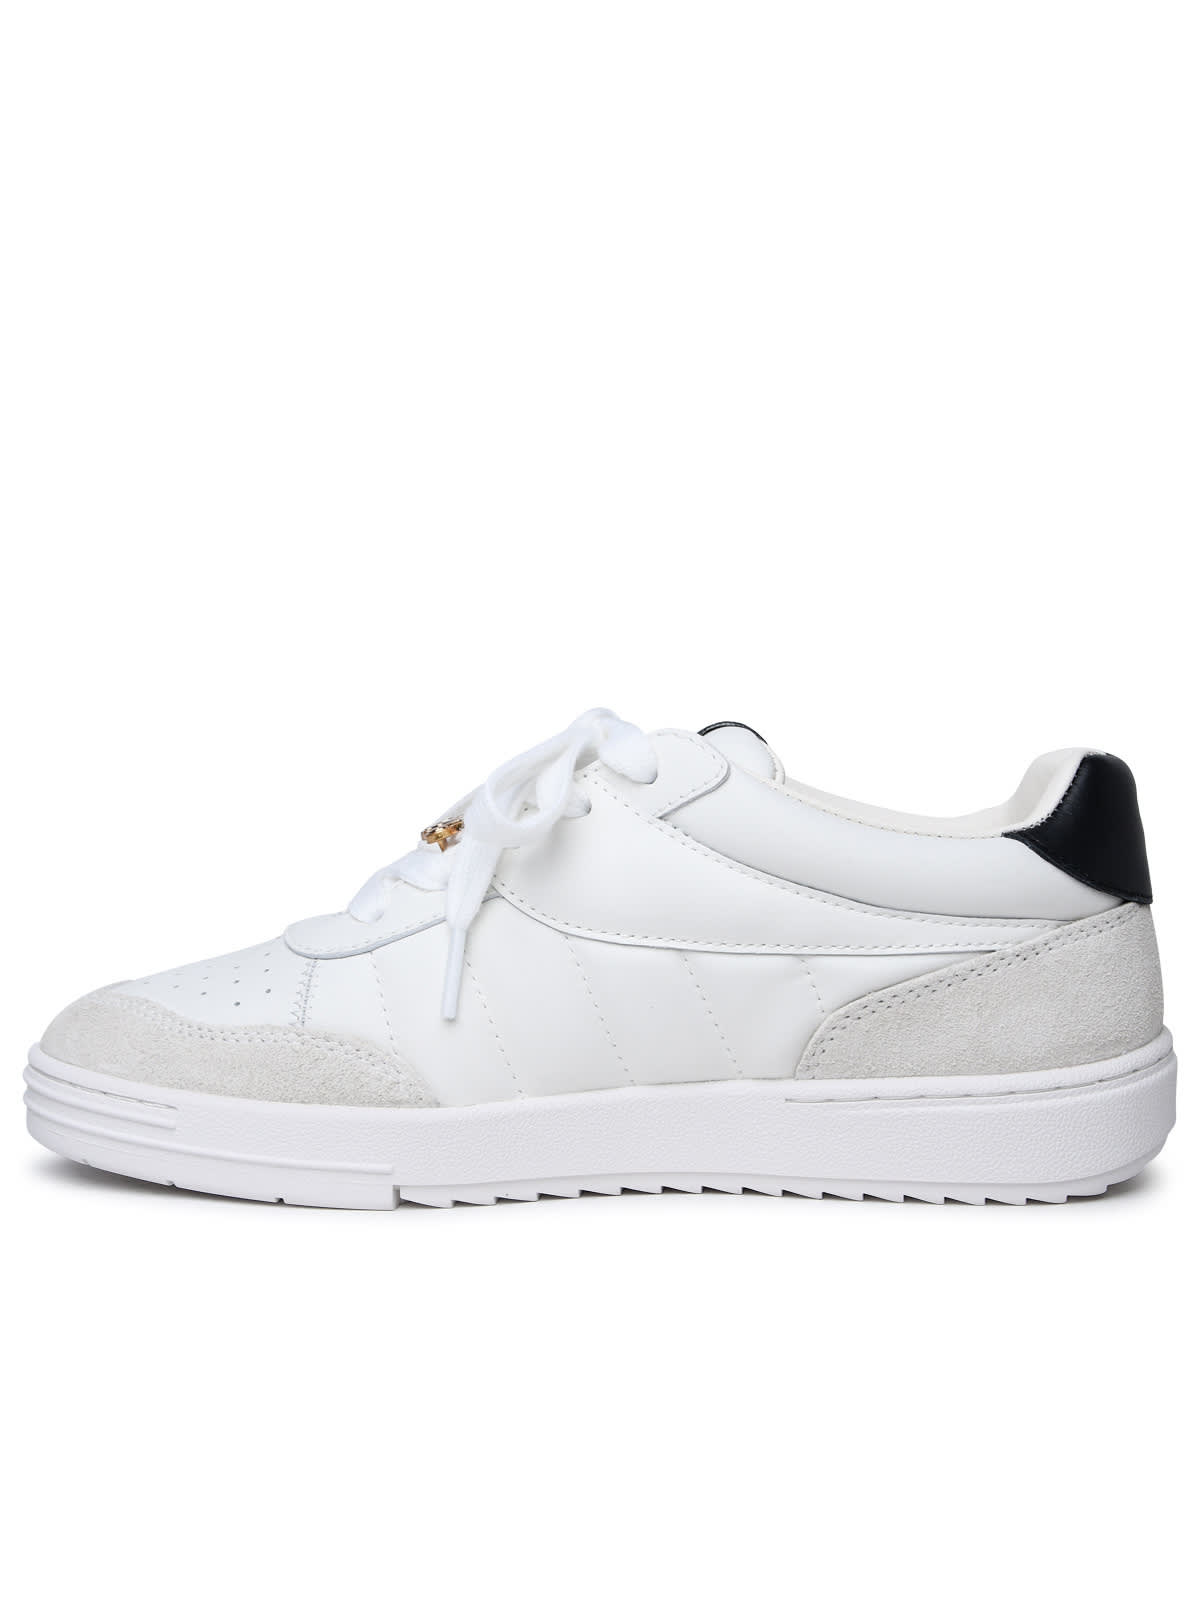 Shop Palm Angels Palm Beach University White Leather Sneakers In White Black (white)